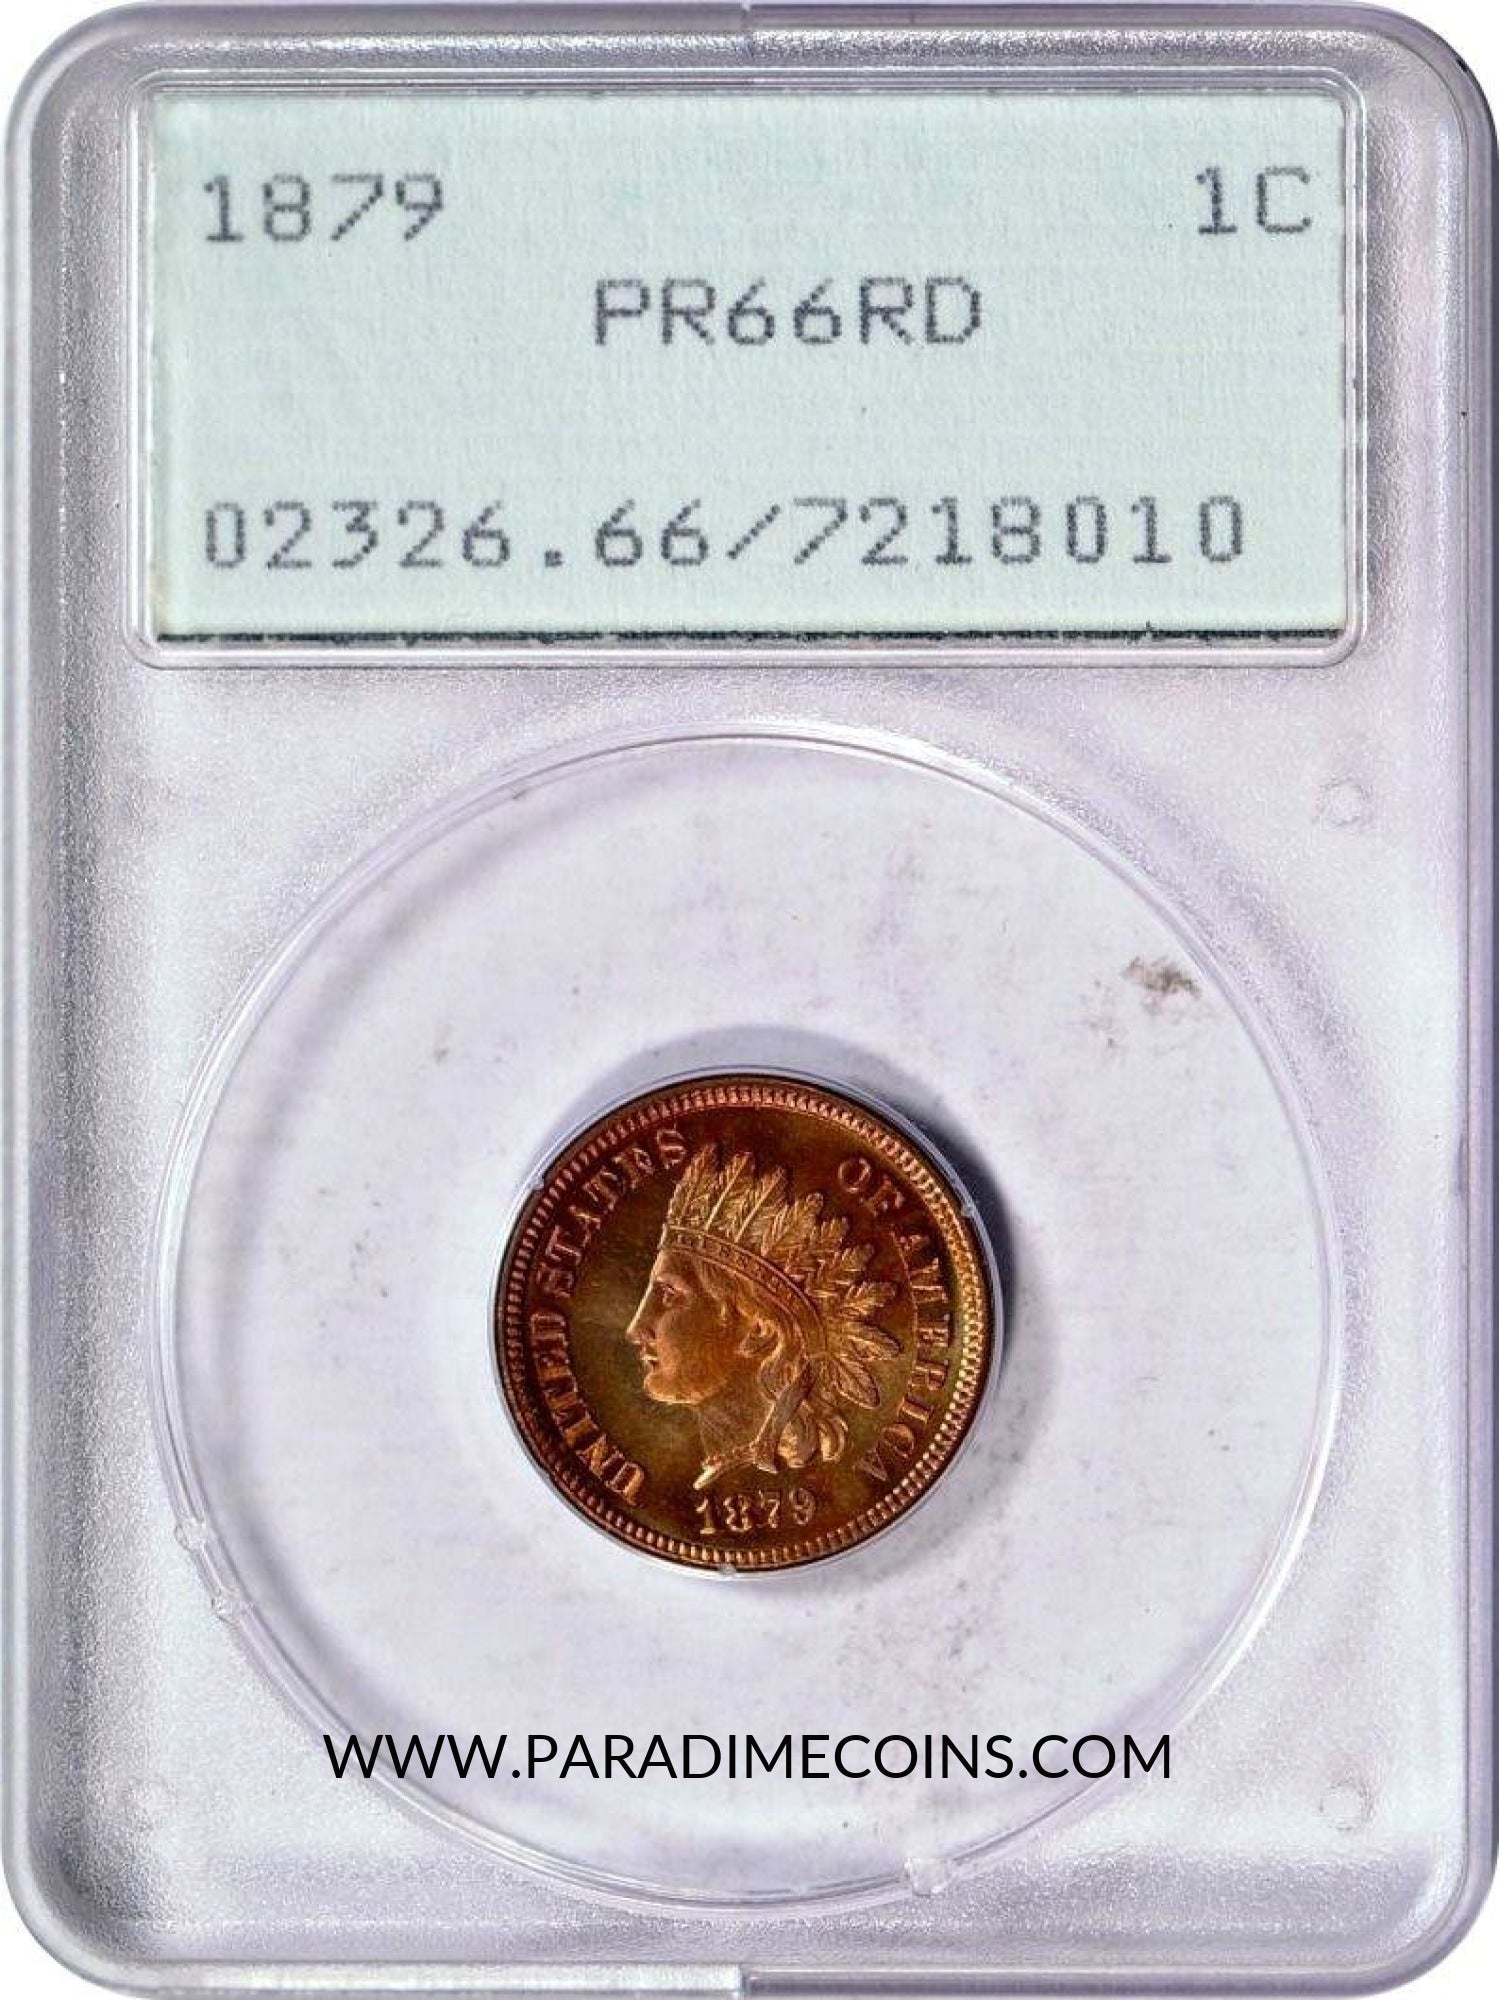 1879 1C PR66RD PCGS OGH Rattler - Paradime Coins | PCGS NGC CACG CAC Rare US Numismatic Coins For Sale